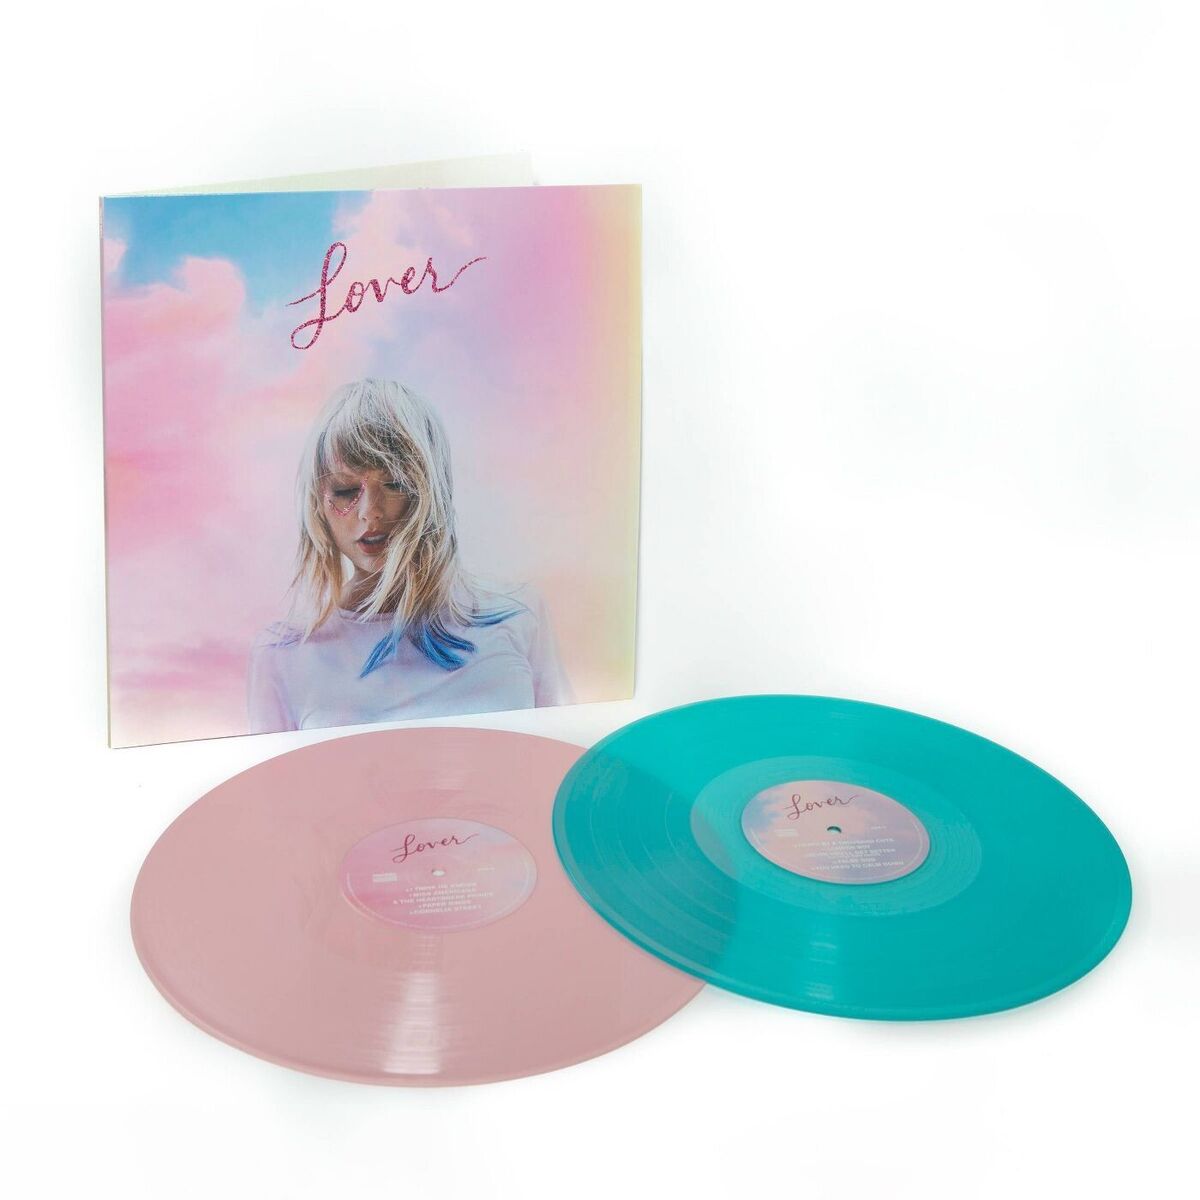 Taylor Swift - Lover - Exclusive Vinyl - 2 Disc Color Set - Brand New &  Sealed